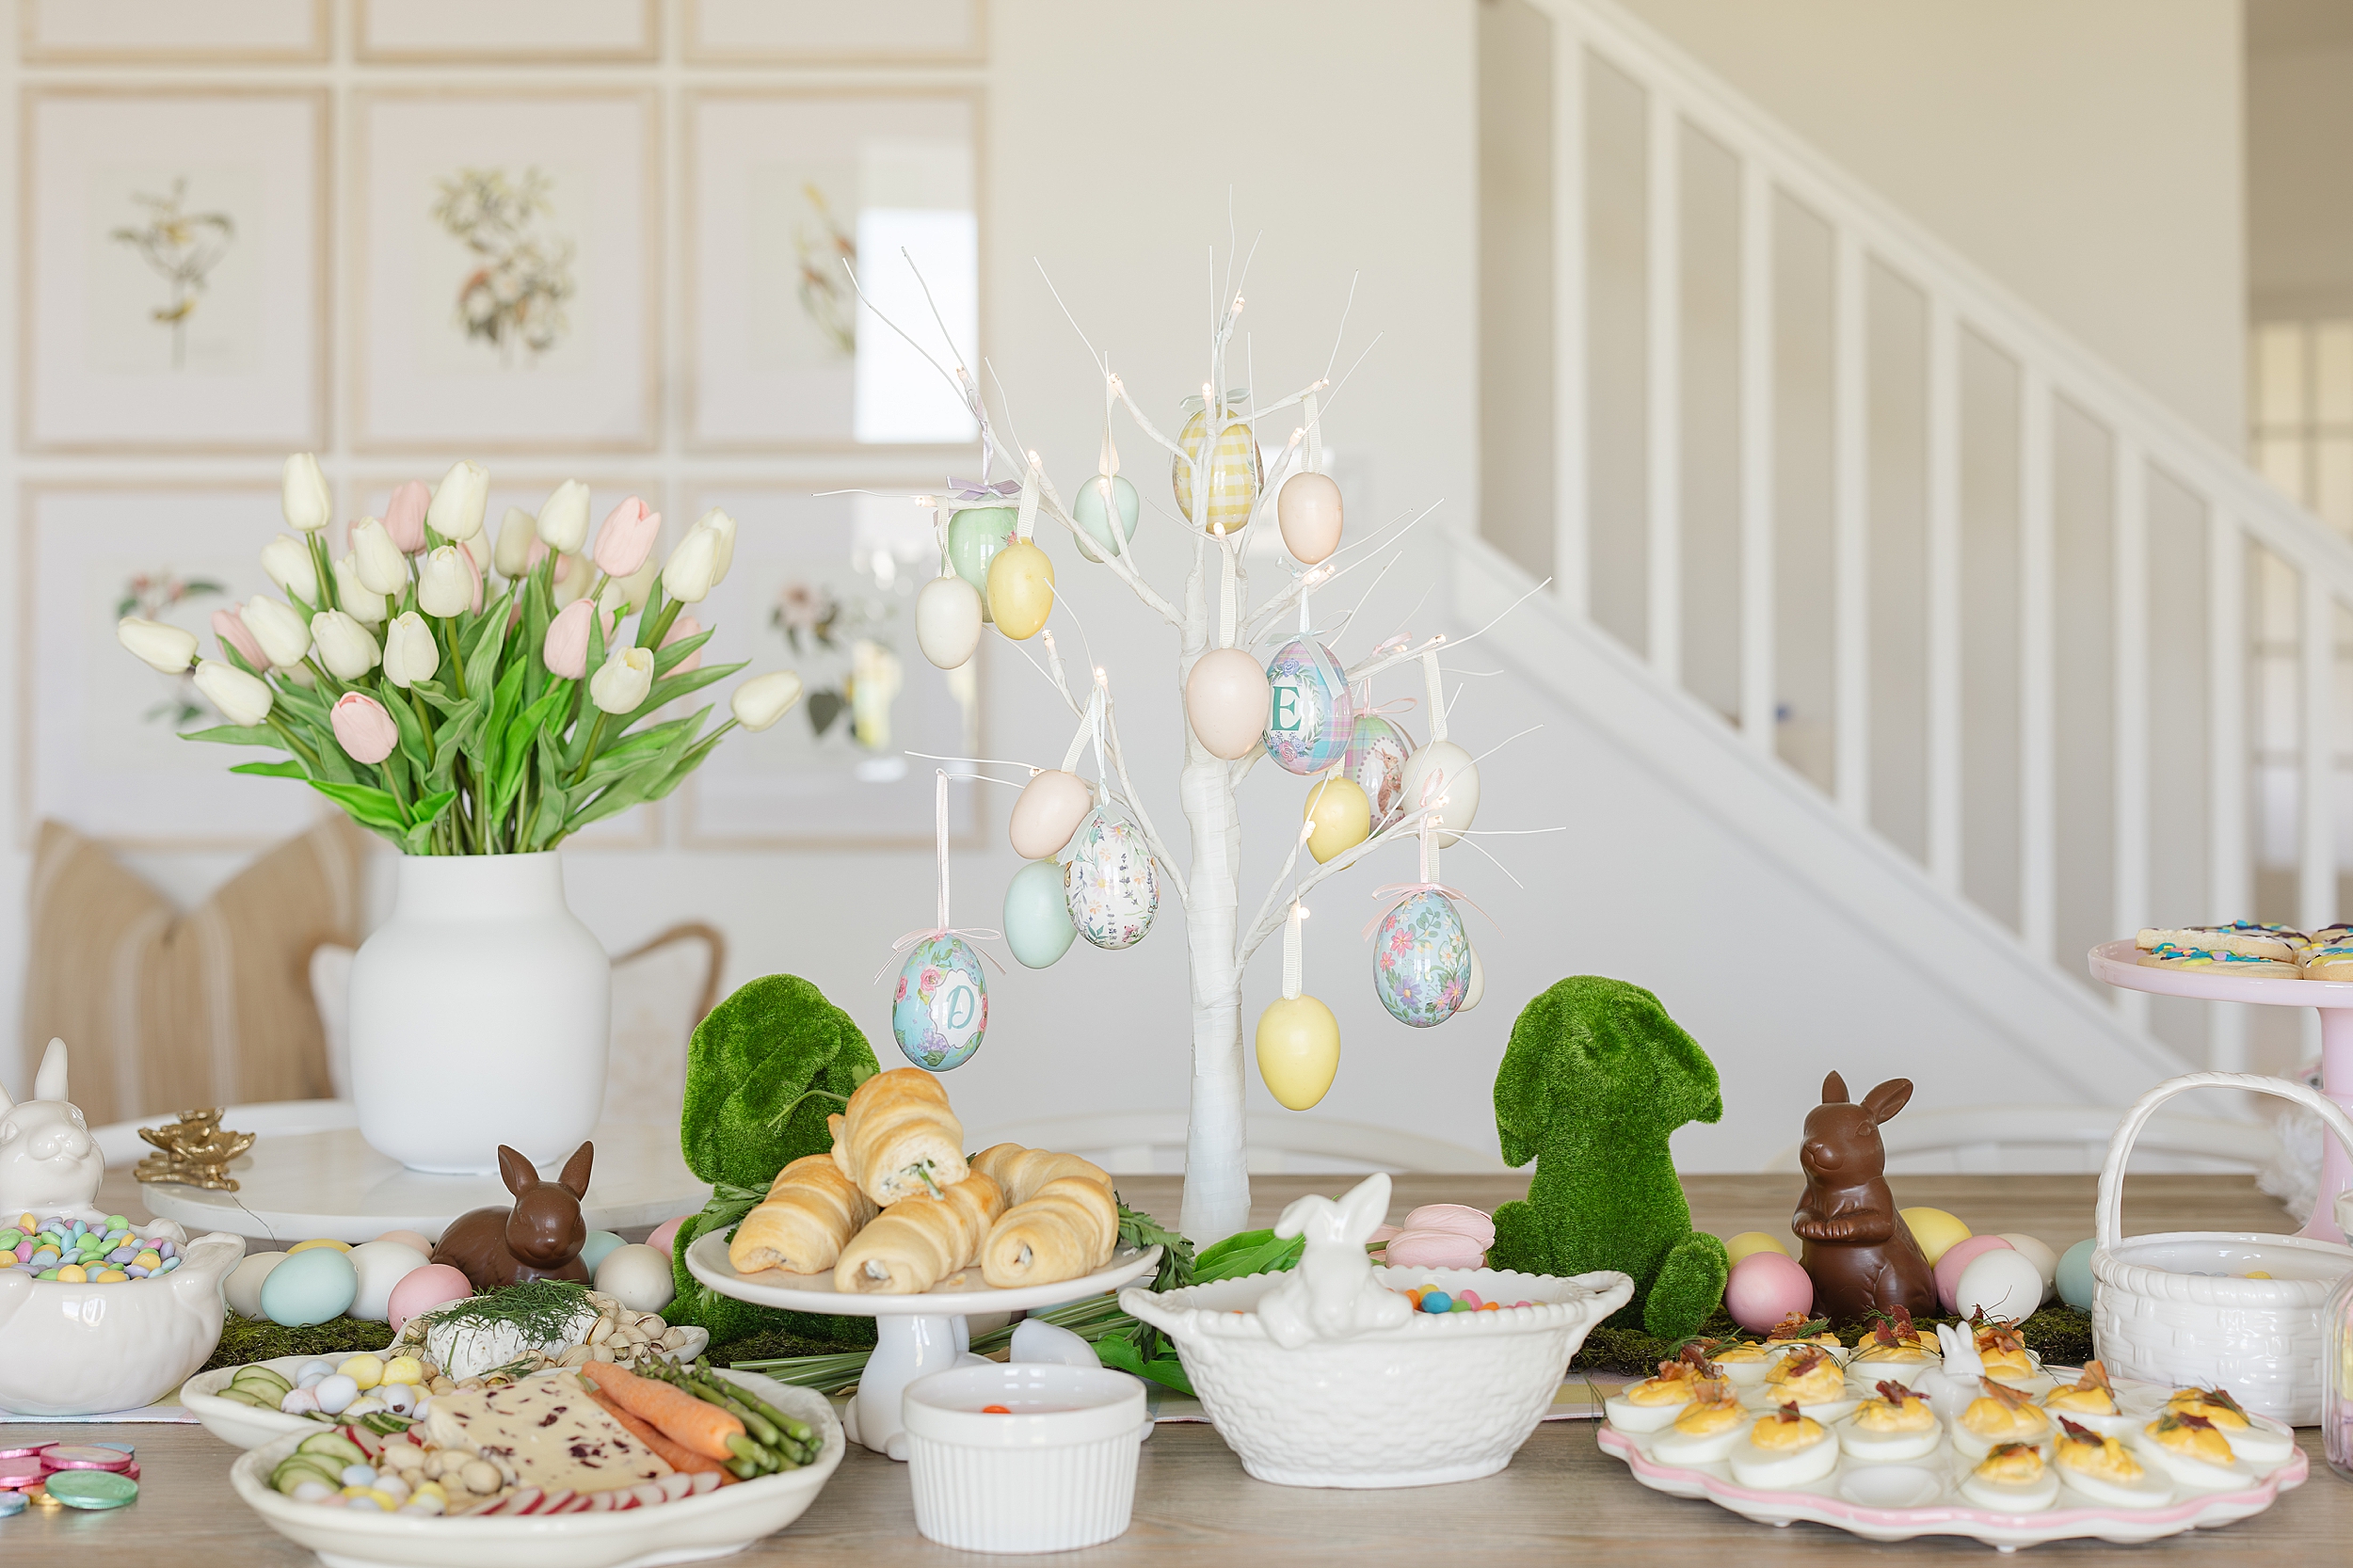 A pastel spring inspired table set for Easter.